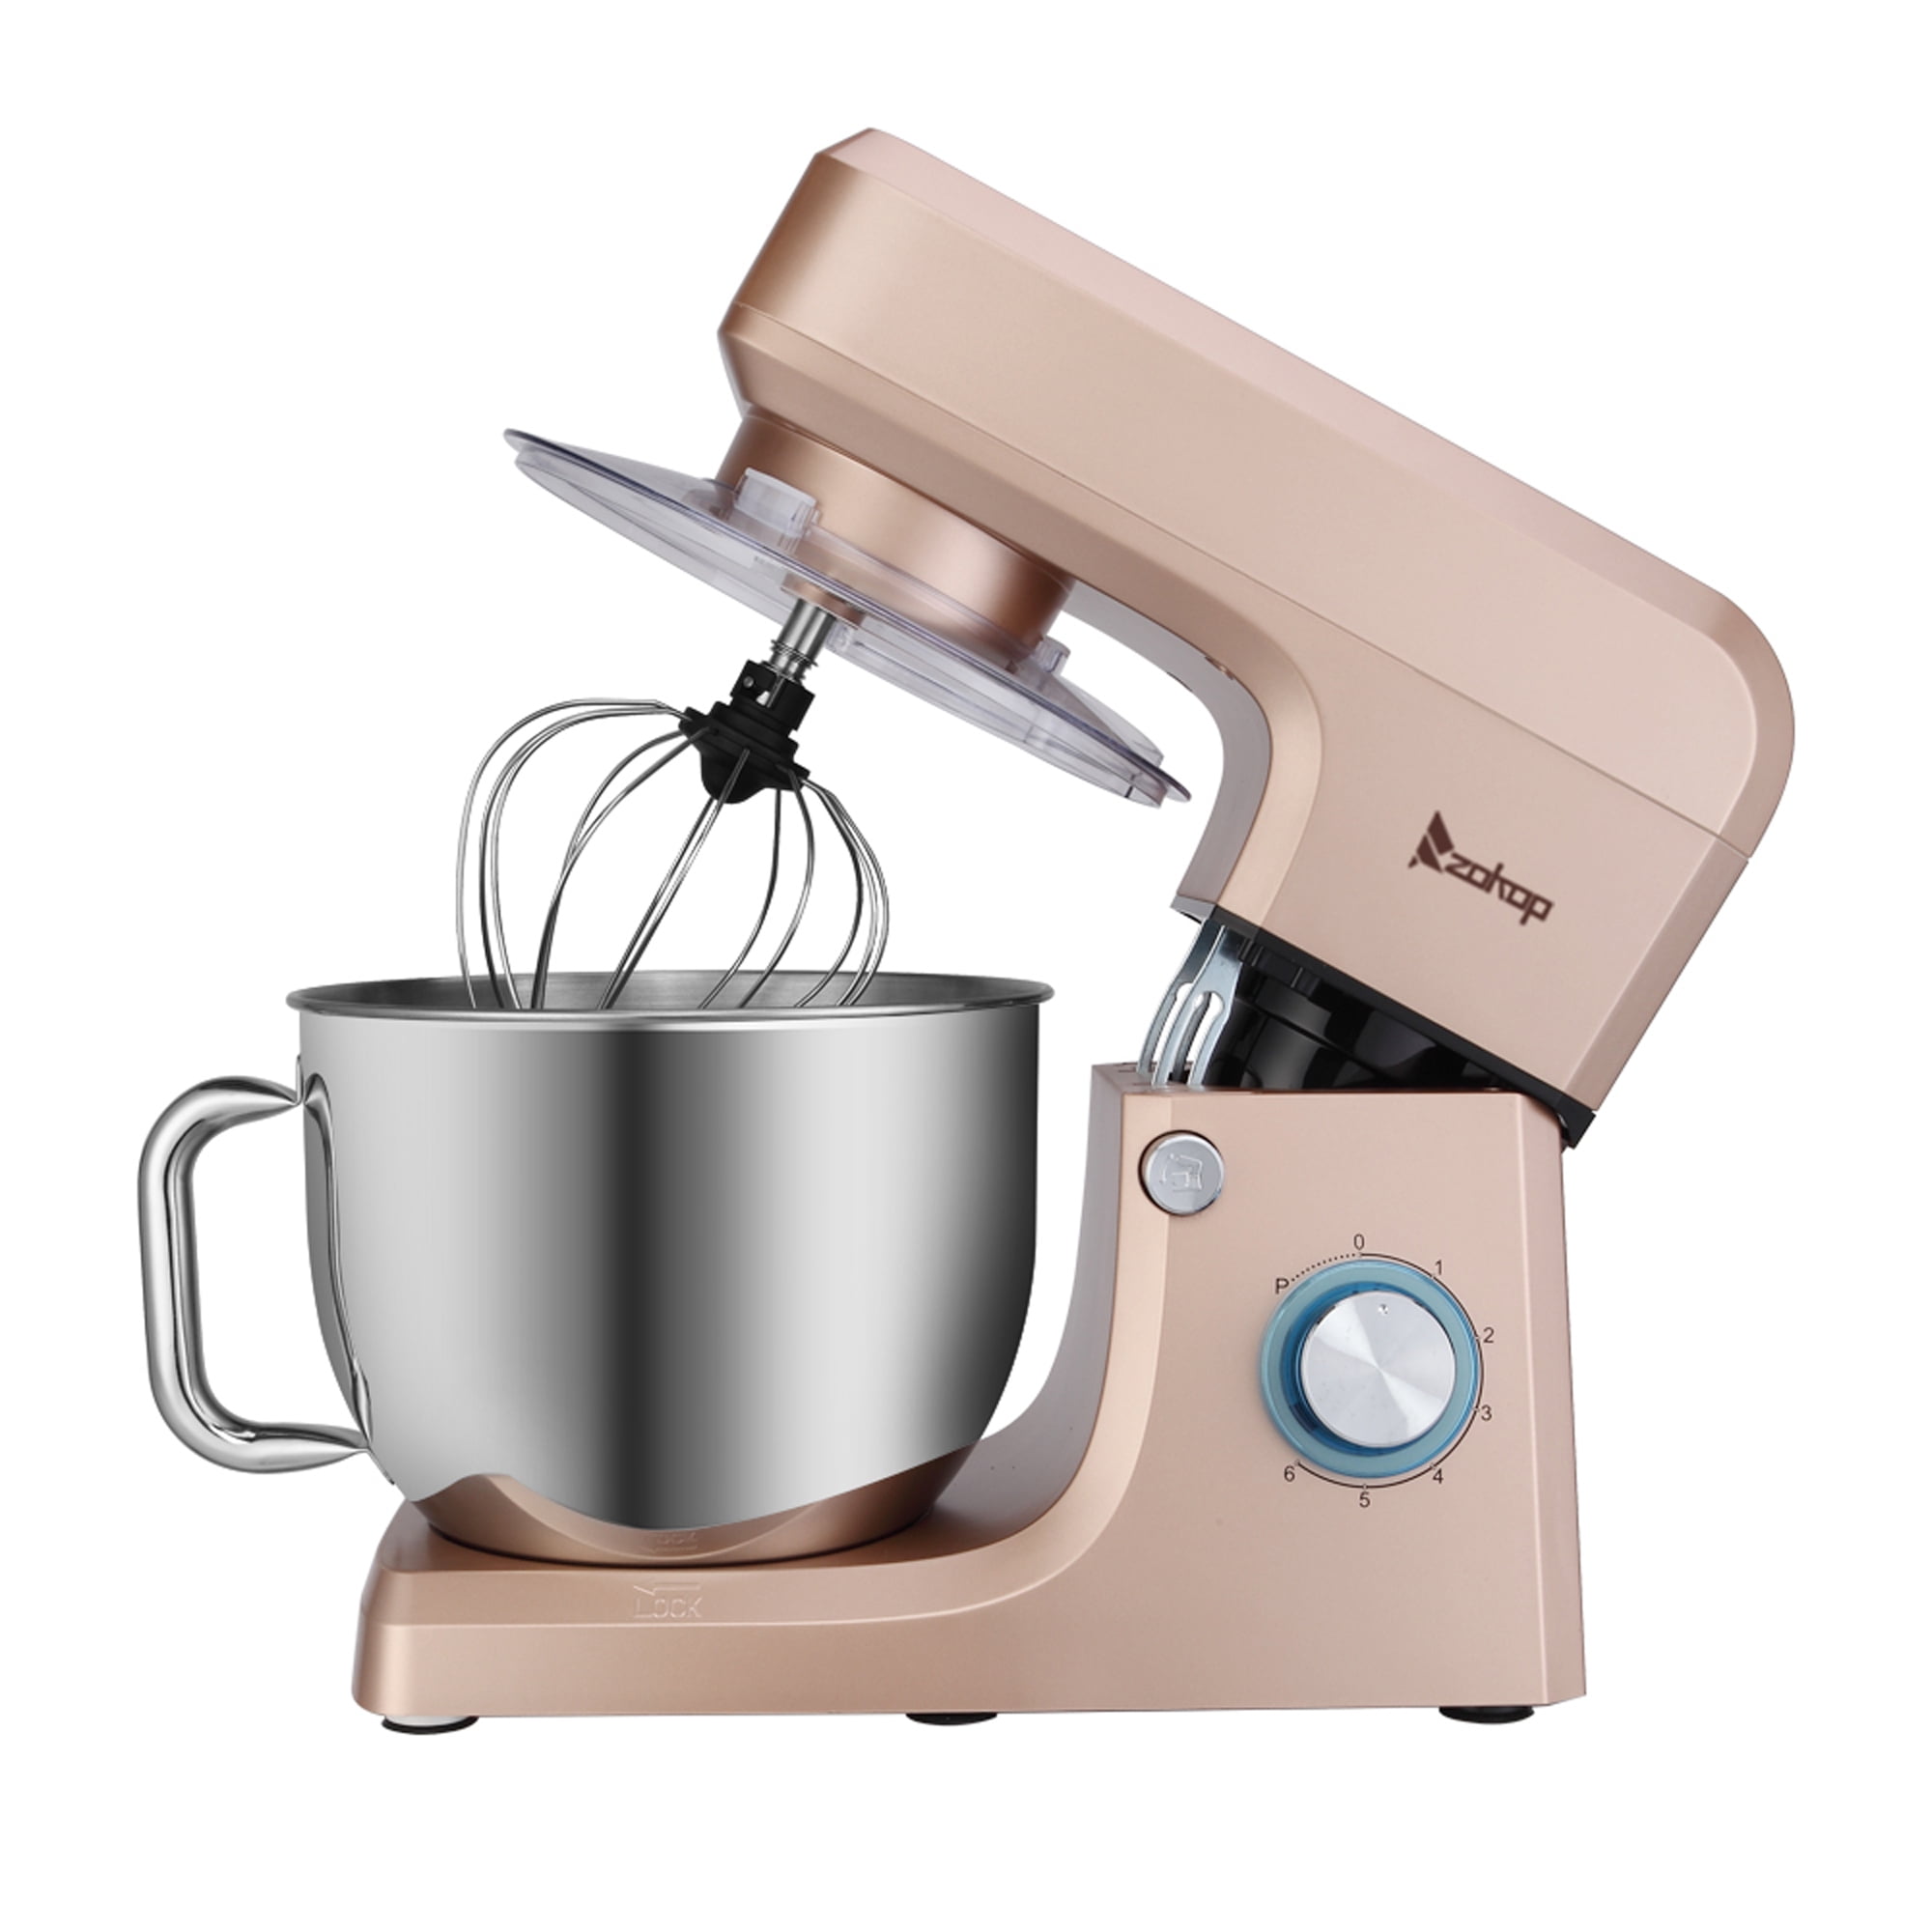 Dropship CWIIM Stand Mixer, 7.5-QT 660W 6-Speed Tilt-Head Kitchen Electric Stand  Mixer Food Mixers With Dough Hook, Whisk, Beater, Splash Guard & Mixing  Bowl to Sell Online at a Lower Price